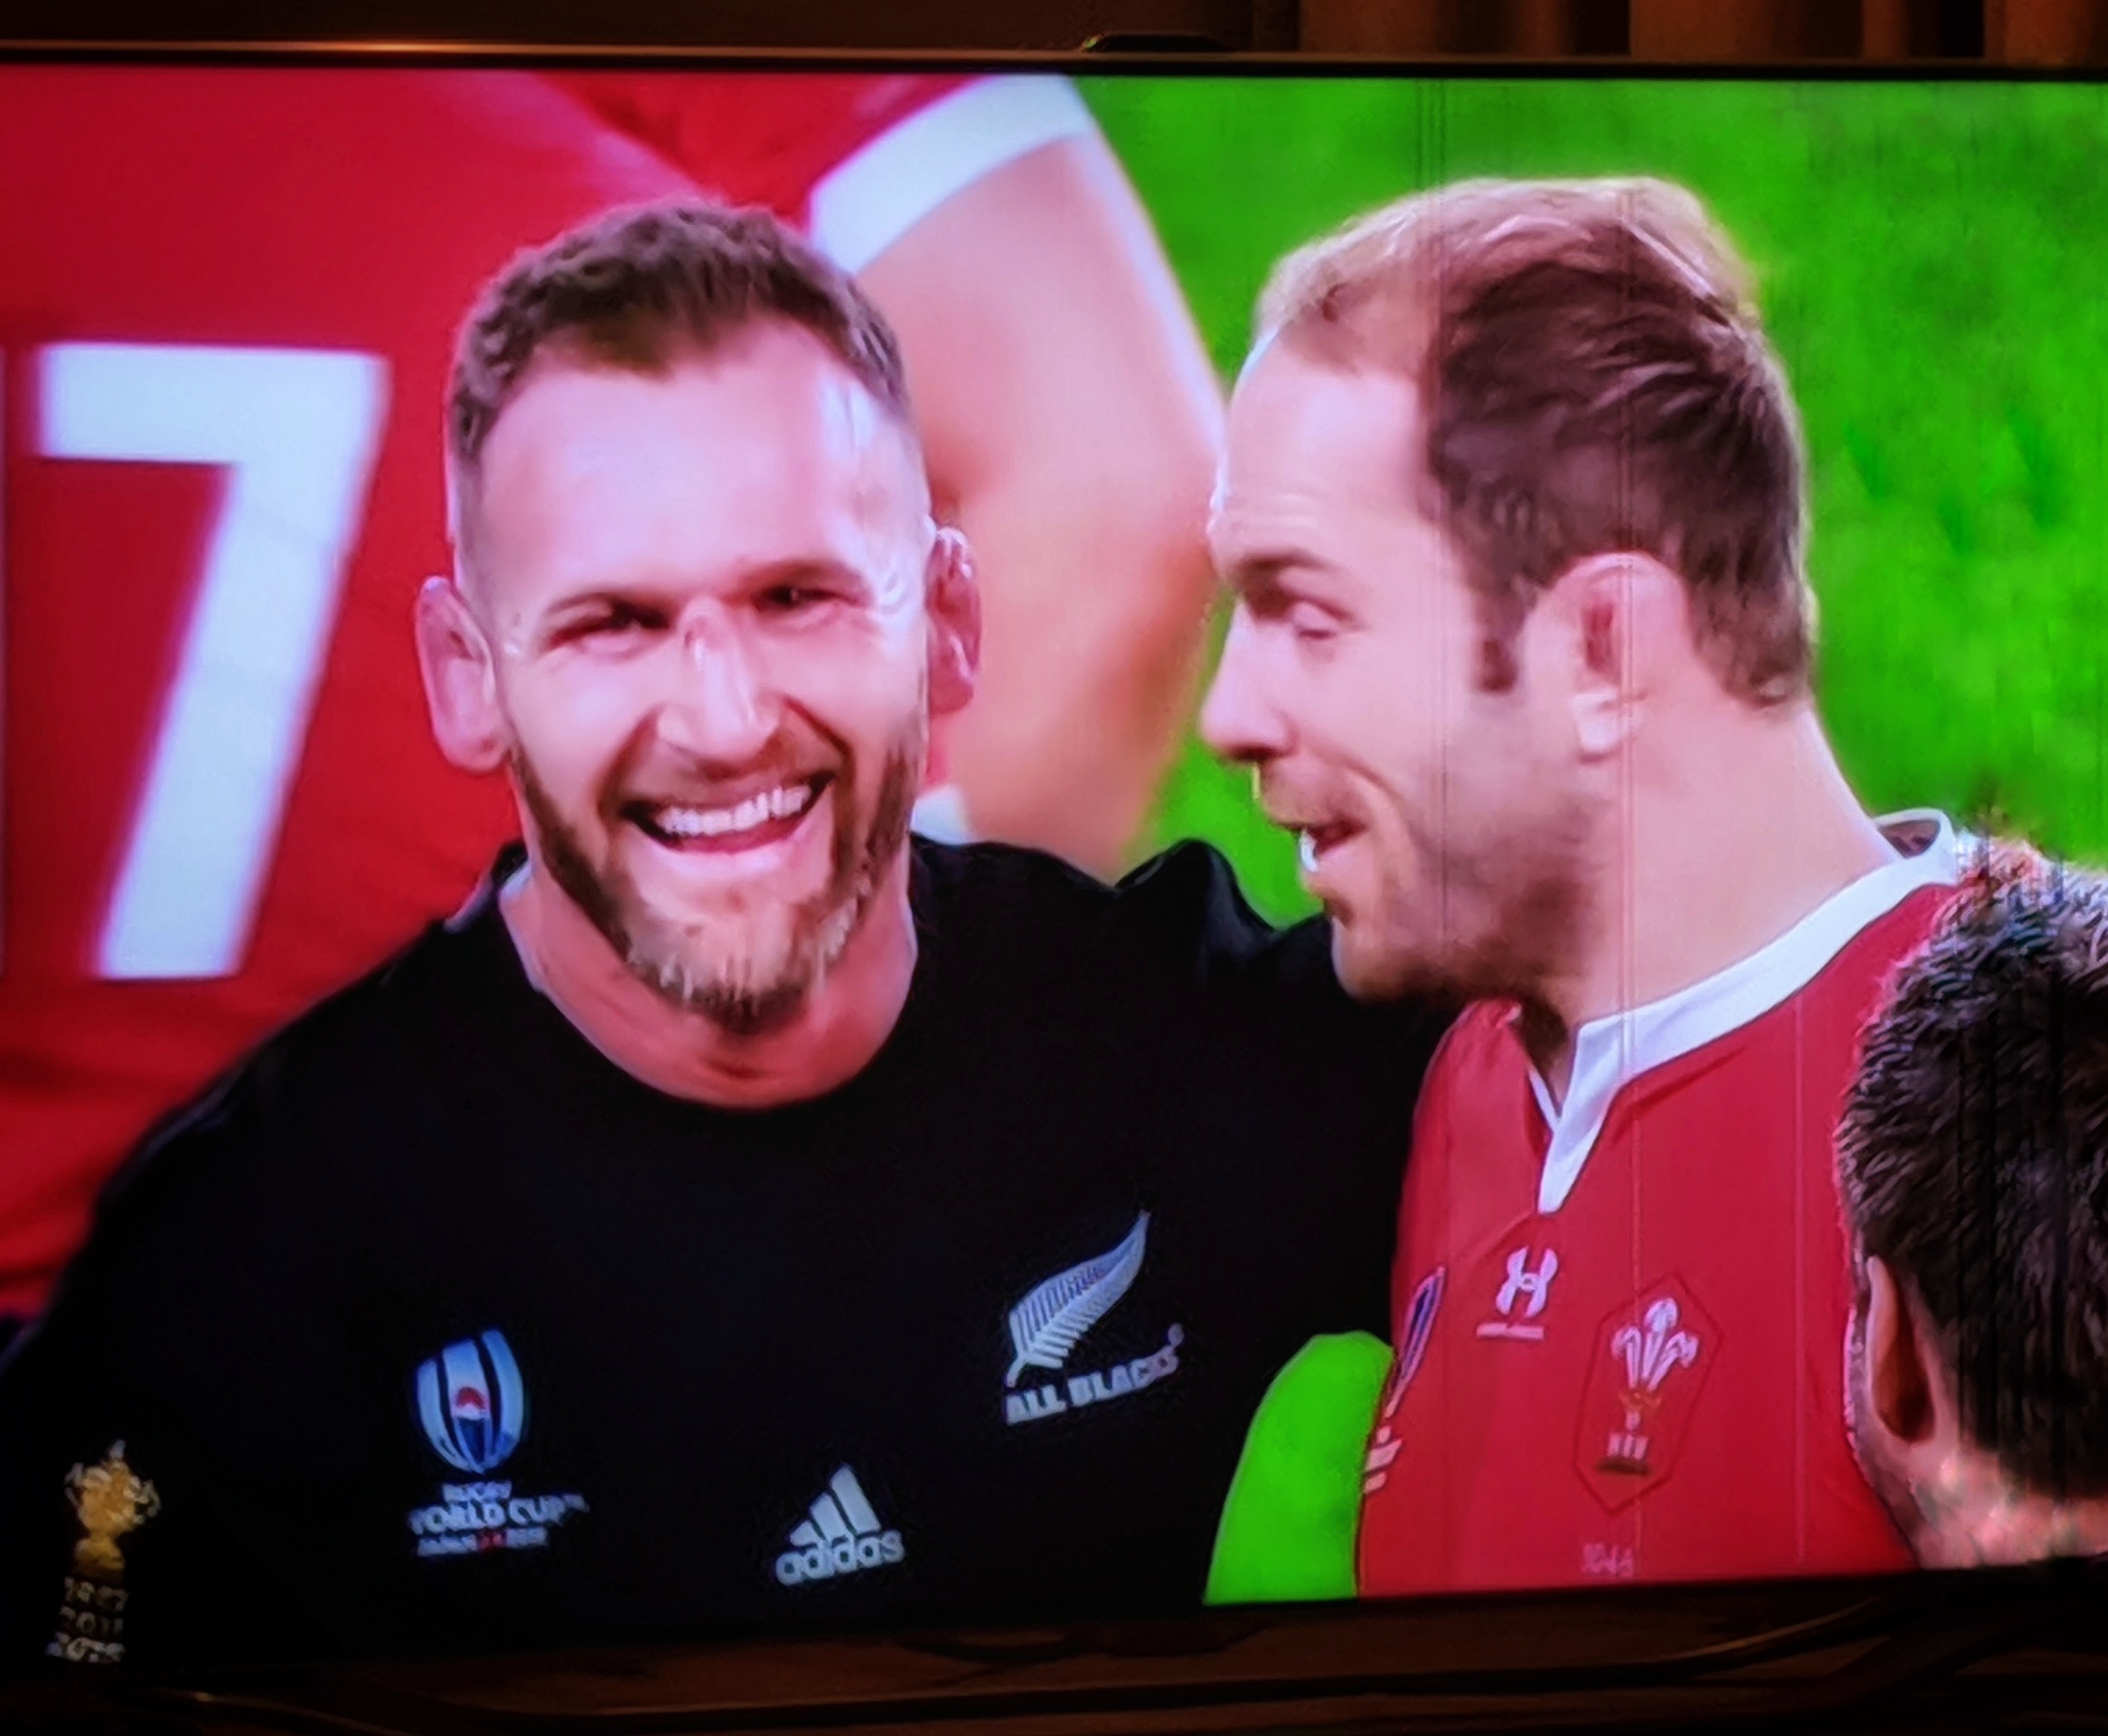 All Back captain, Kieran Read, and Welsh captain, Alun Wyn Jones, after the third-place playoff in the Rugby World Cup 2019